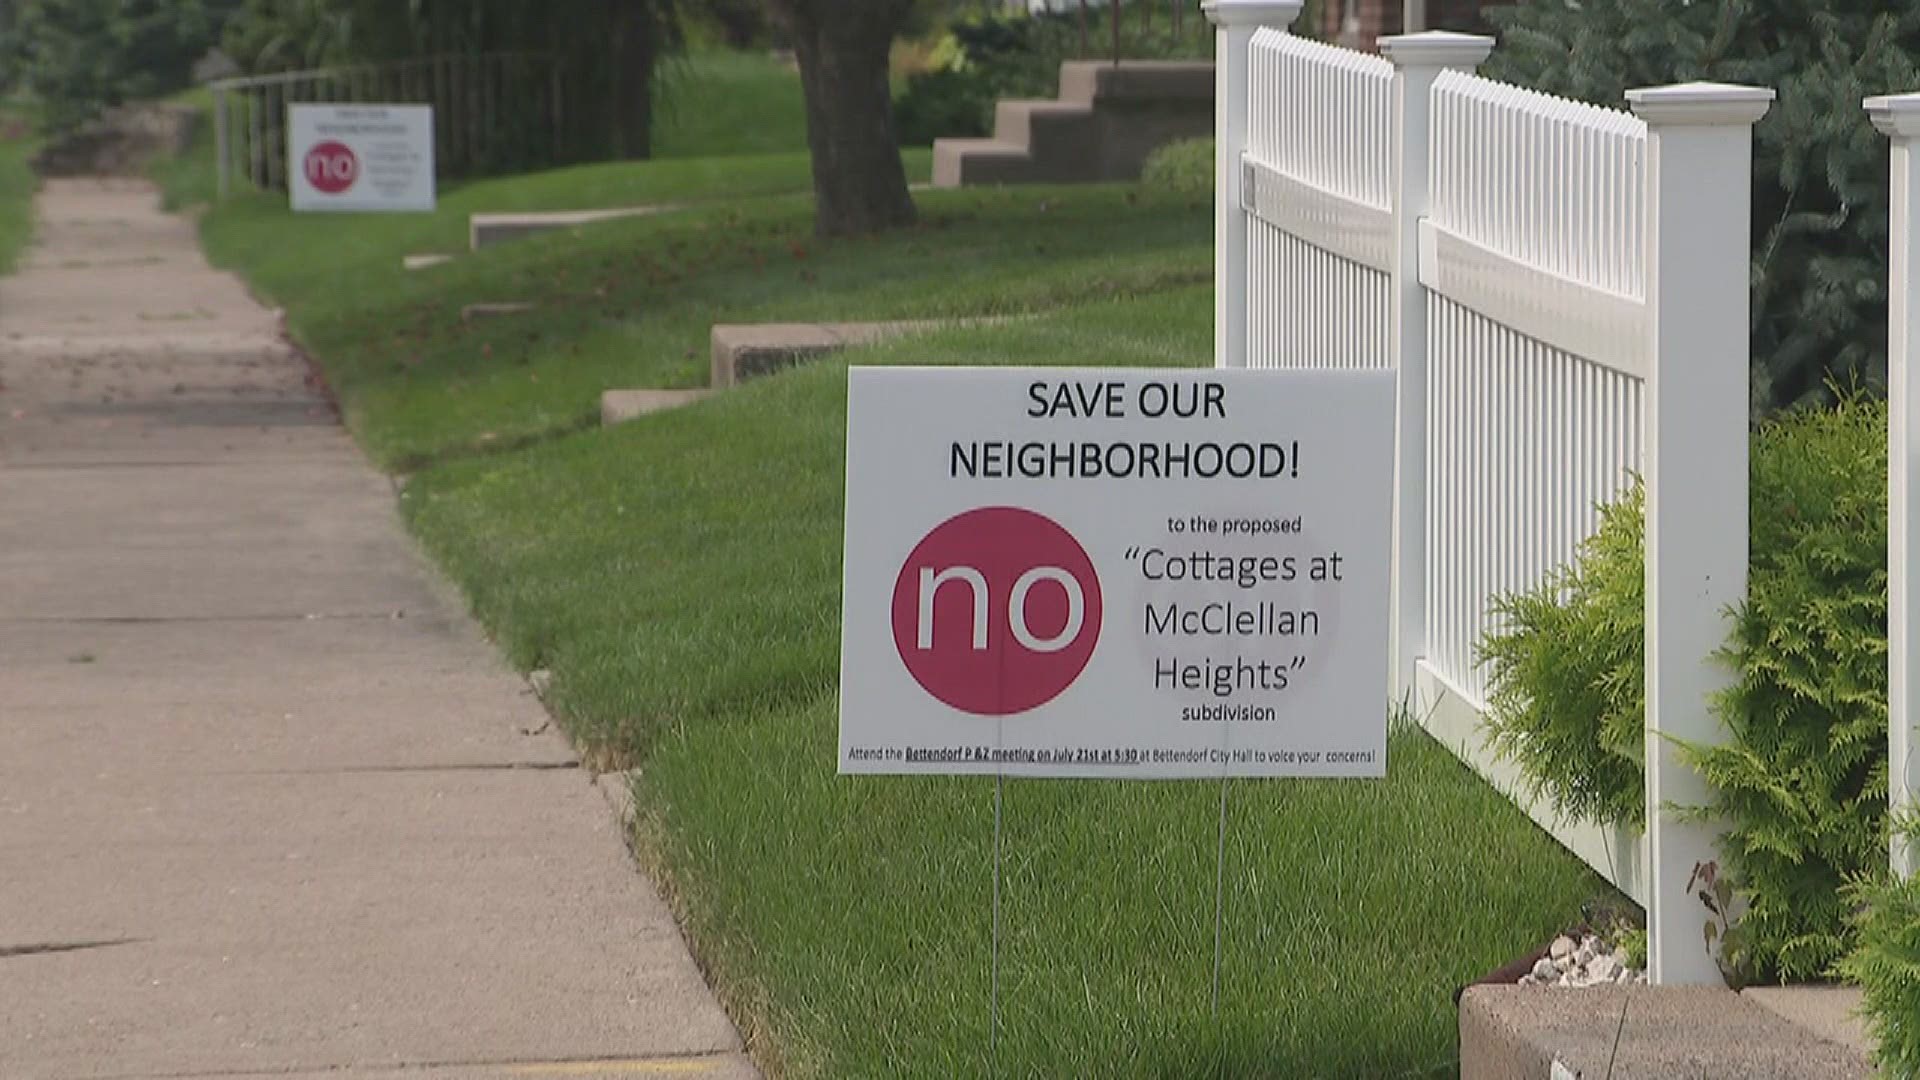 Neighbors in Davenport will also be affected by the construction if approved by Bettendorf City Council.